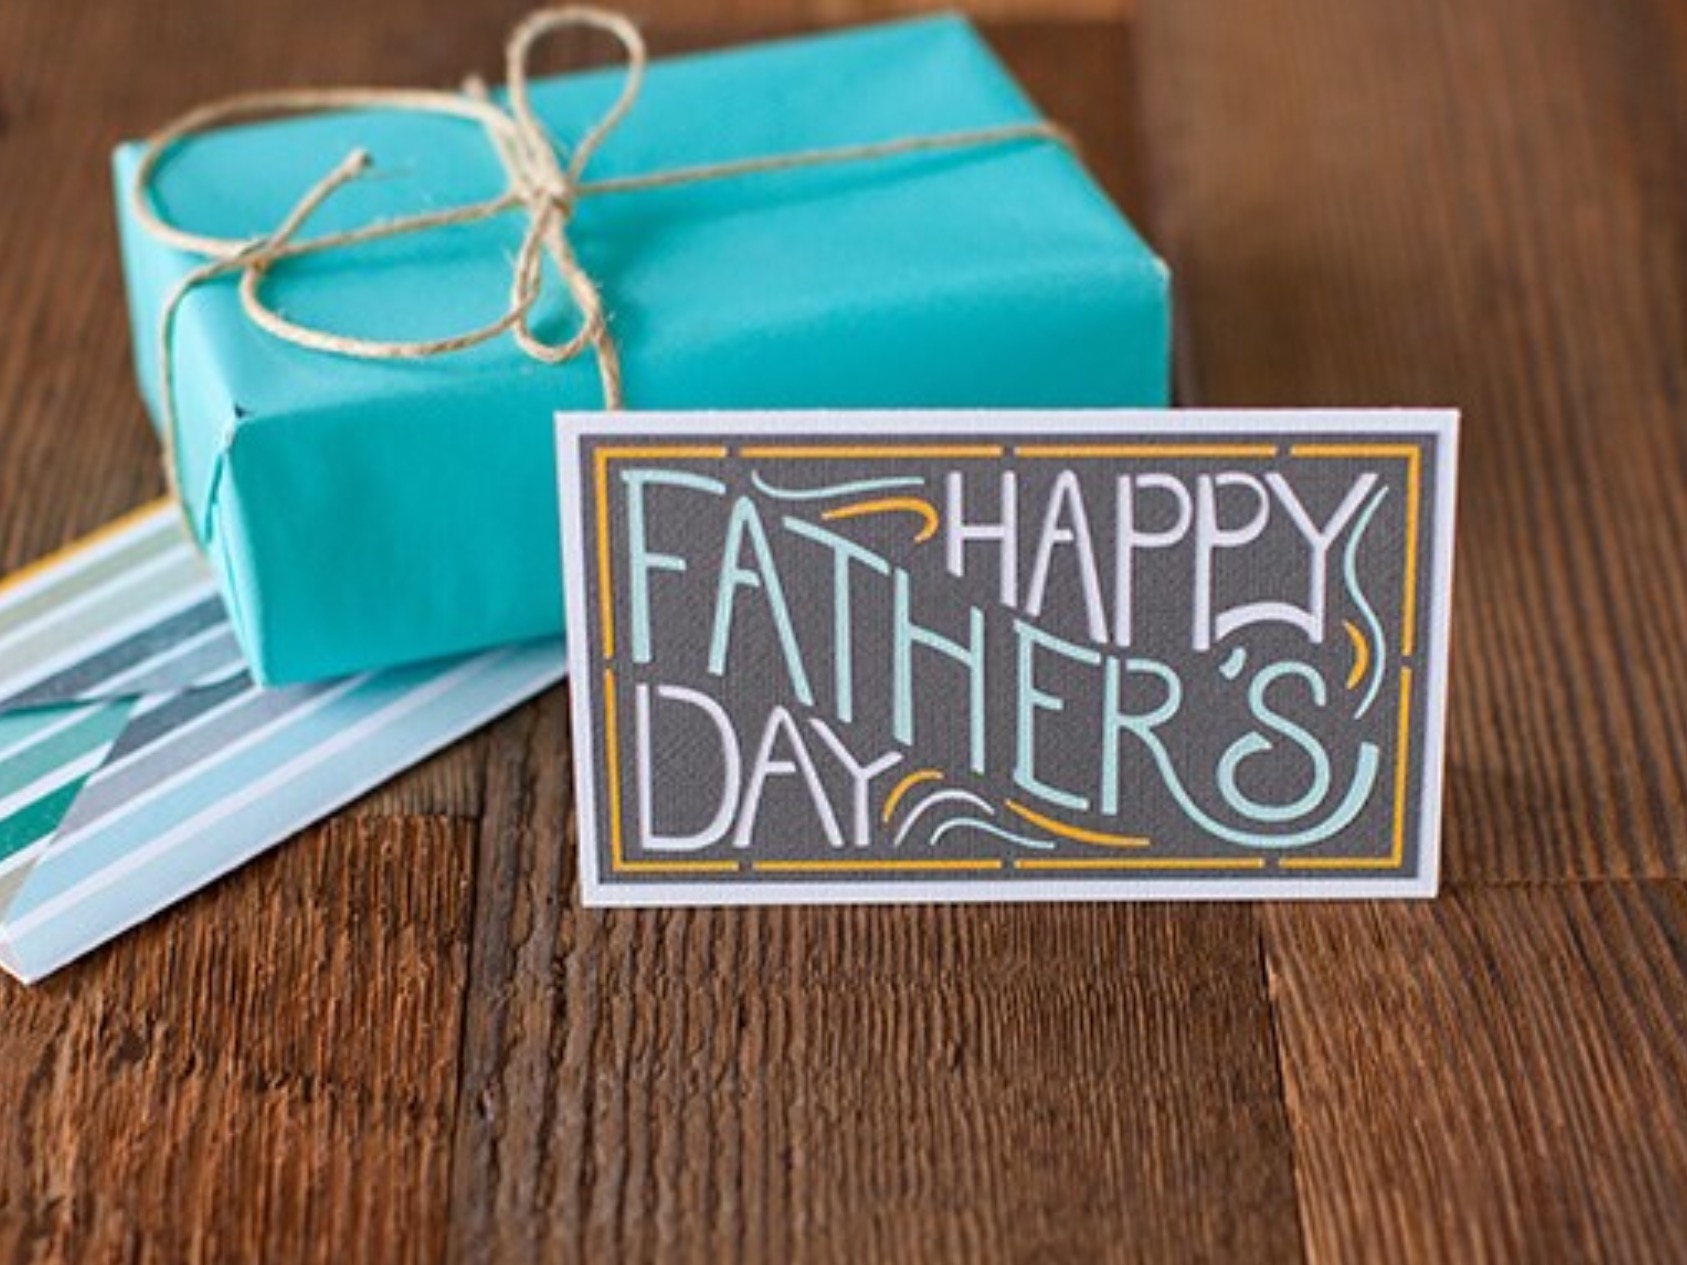 Download 41+ Fathers Day Card Svg File Free Background Free SVG files | Silhouette and Cricut Cutting Files